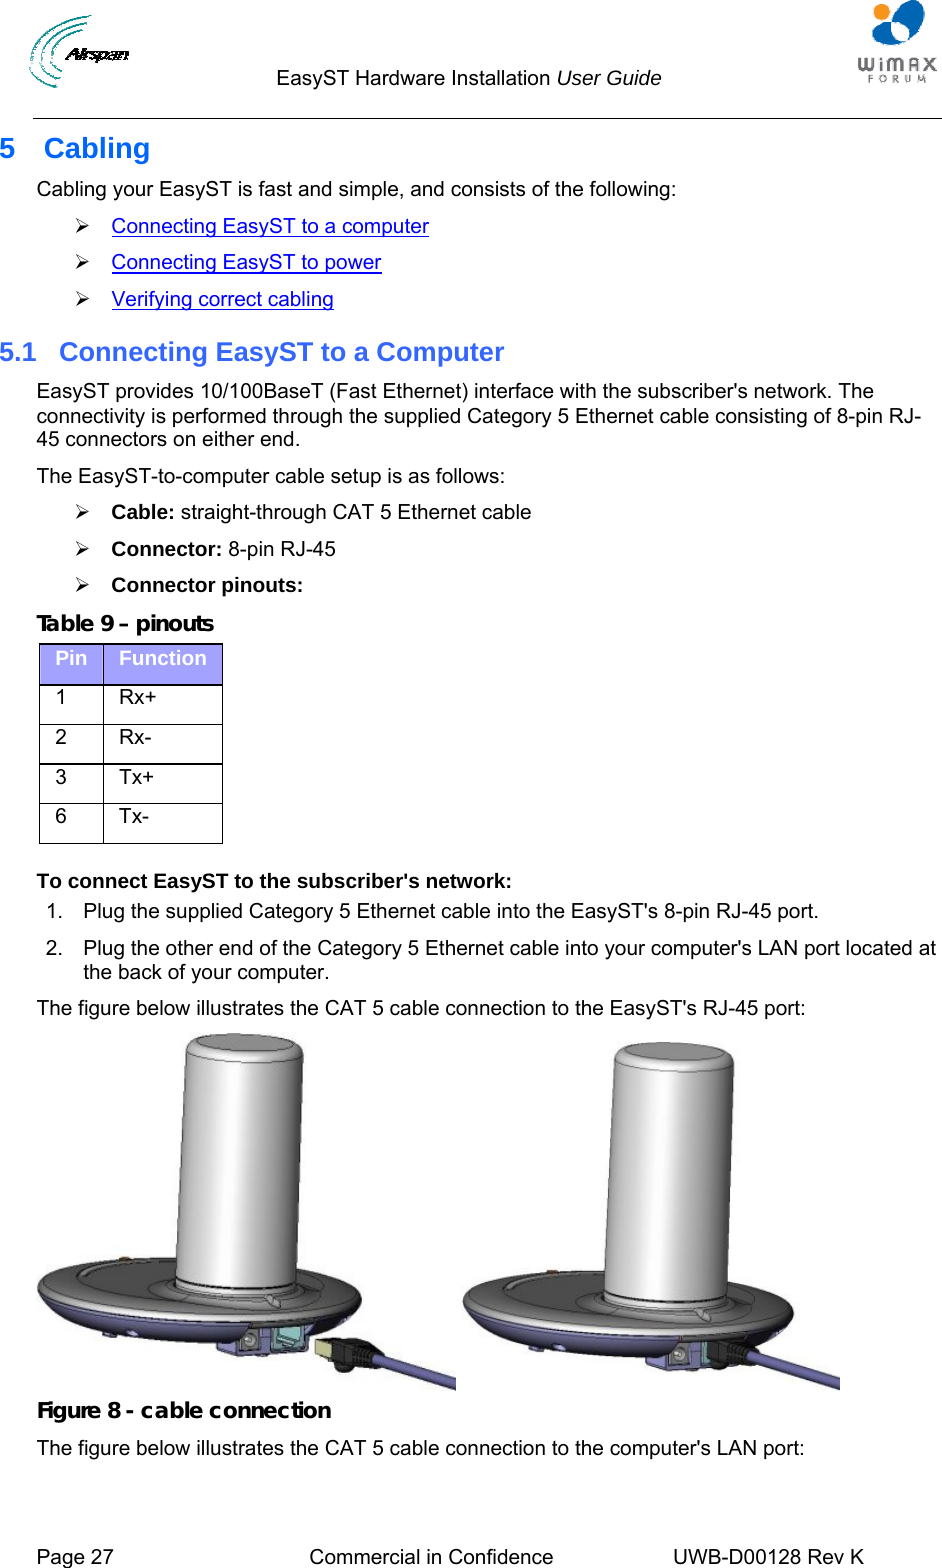                                  EasyST Hardware Installation User Guide     Page 27  Commercial in Confidence  UWB-D00128 Rev K   5 Cabling Cabling your EasyST is fast and simple, and consists of the following: ¾ Connecting EasyST to a computer ¾ Connecting EasyST to power ¾ Verifying correct cabling 5.1  Connecting EasyST to a Computer EasyST provides 10/100BaseT (Fast Ethernet) interface with the subscriber&apos;s network. The connectivity is performed through the supplied Category 5 Ethernet cable consisting of 8-pin RJ-45 connectors on either end. The EasyST-to-computer cable setup is as follows: ¾ Cable: straight-through CAT 5 Ethernet cable ¾ Connector: 8-pin RJ-45 ¾ Connector pinouts: Table 9 – pinouts Pin  Function 1 Rx+ 2 Rx- 3 Tx+ 6 Tx-  To connect EasyST to the subscriber&apos;s network: 1.  Plug the supplied Category 5 Ethernet cable into the EasyST&apos;s 8-pin RJ-45 port.  2.  Plug the other end of the Category 5 Ethernet cable into your computer&apos;s LAN port located at the back of your computer. The figure below illustrates the CAT 5 cable connection to the EasyST&apos;s RJ-45 port:    Figure 8 - cable connection The figure below illustrates the CAT 5 cable connection to the computer&apos;s LAN port: 